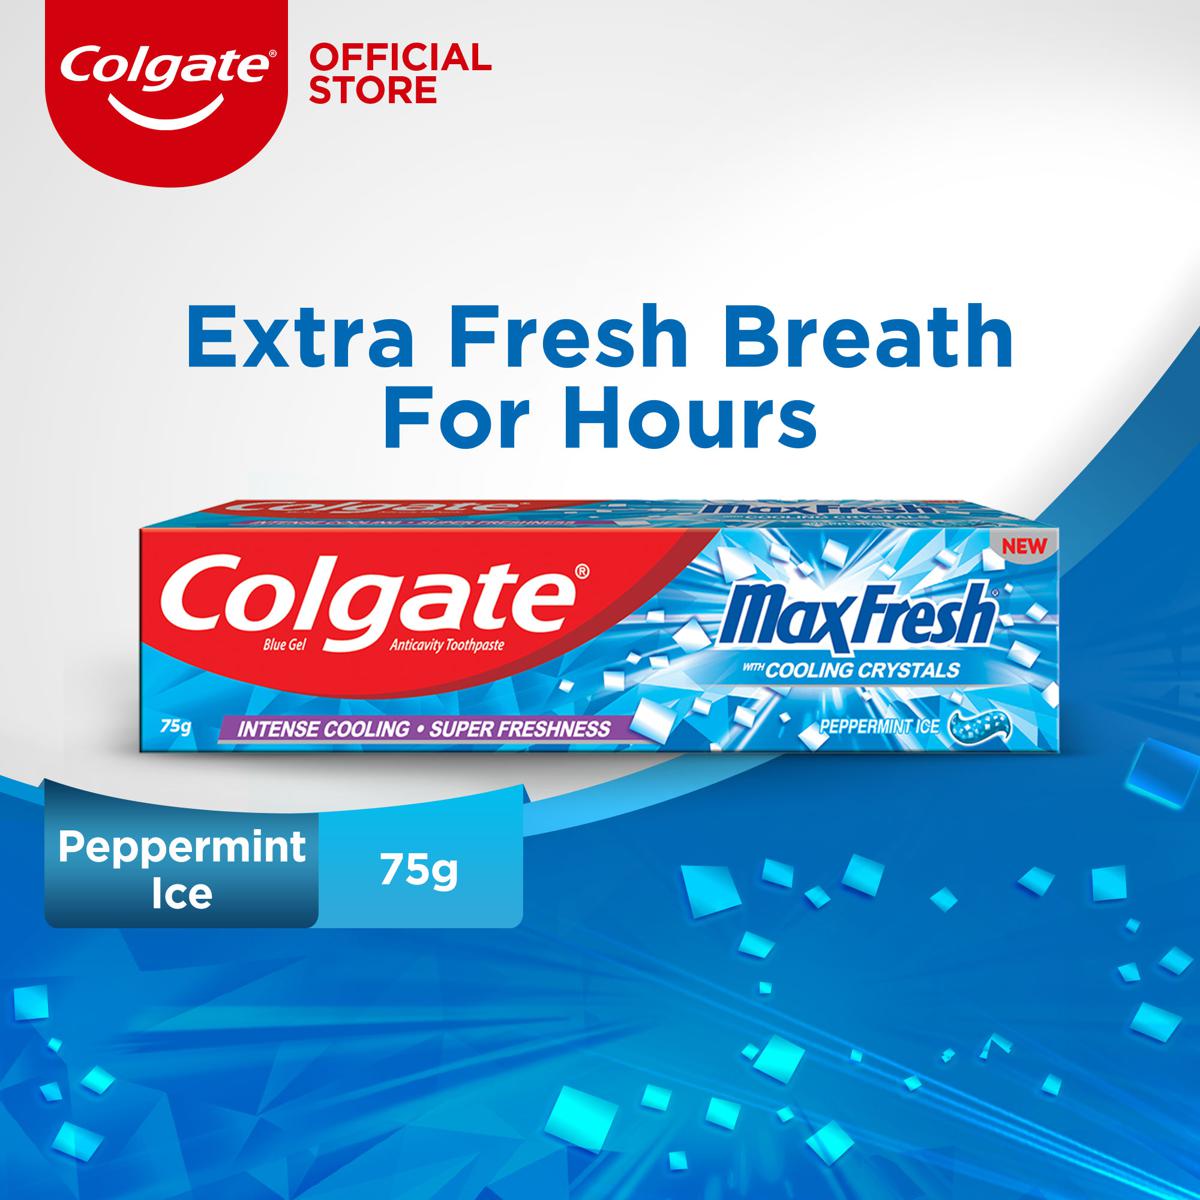 Colgate Maxfresh Peppermint Ice Toothpaste 75g